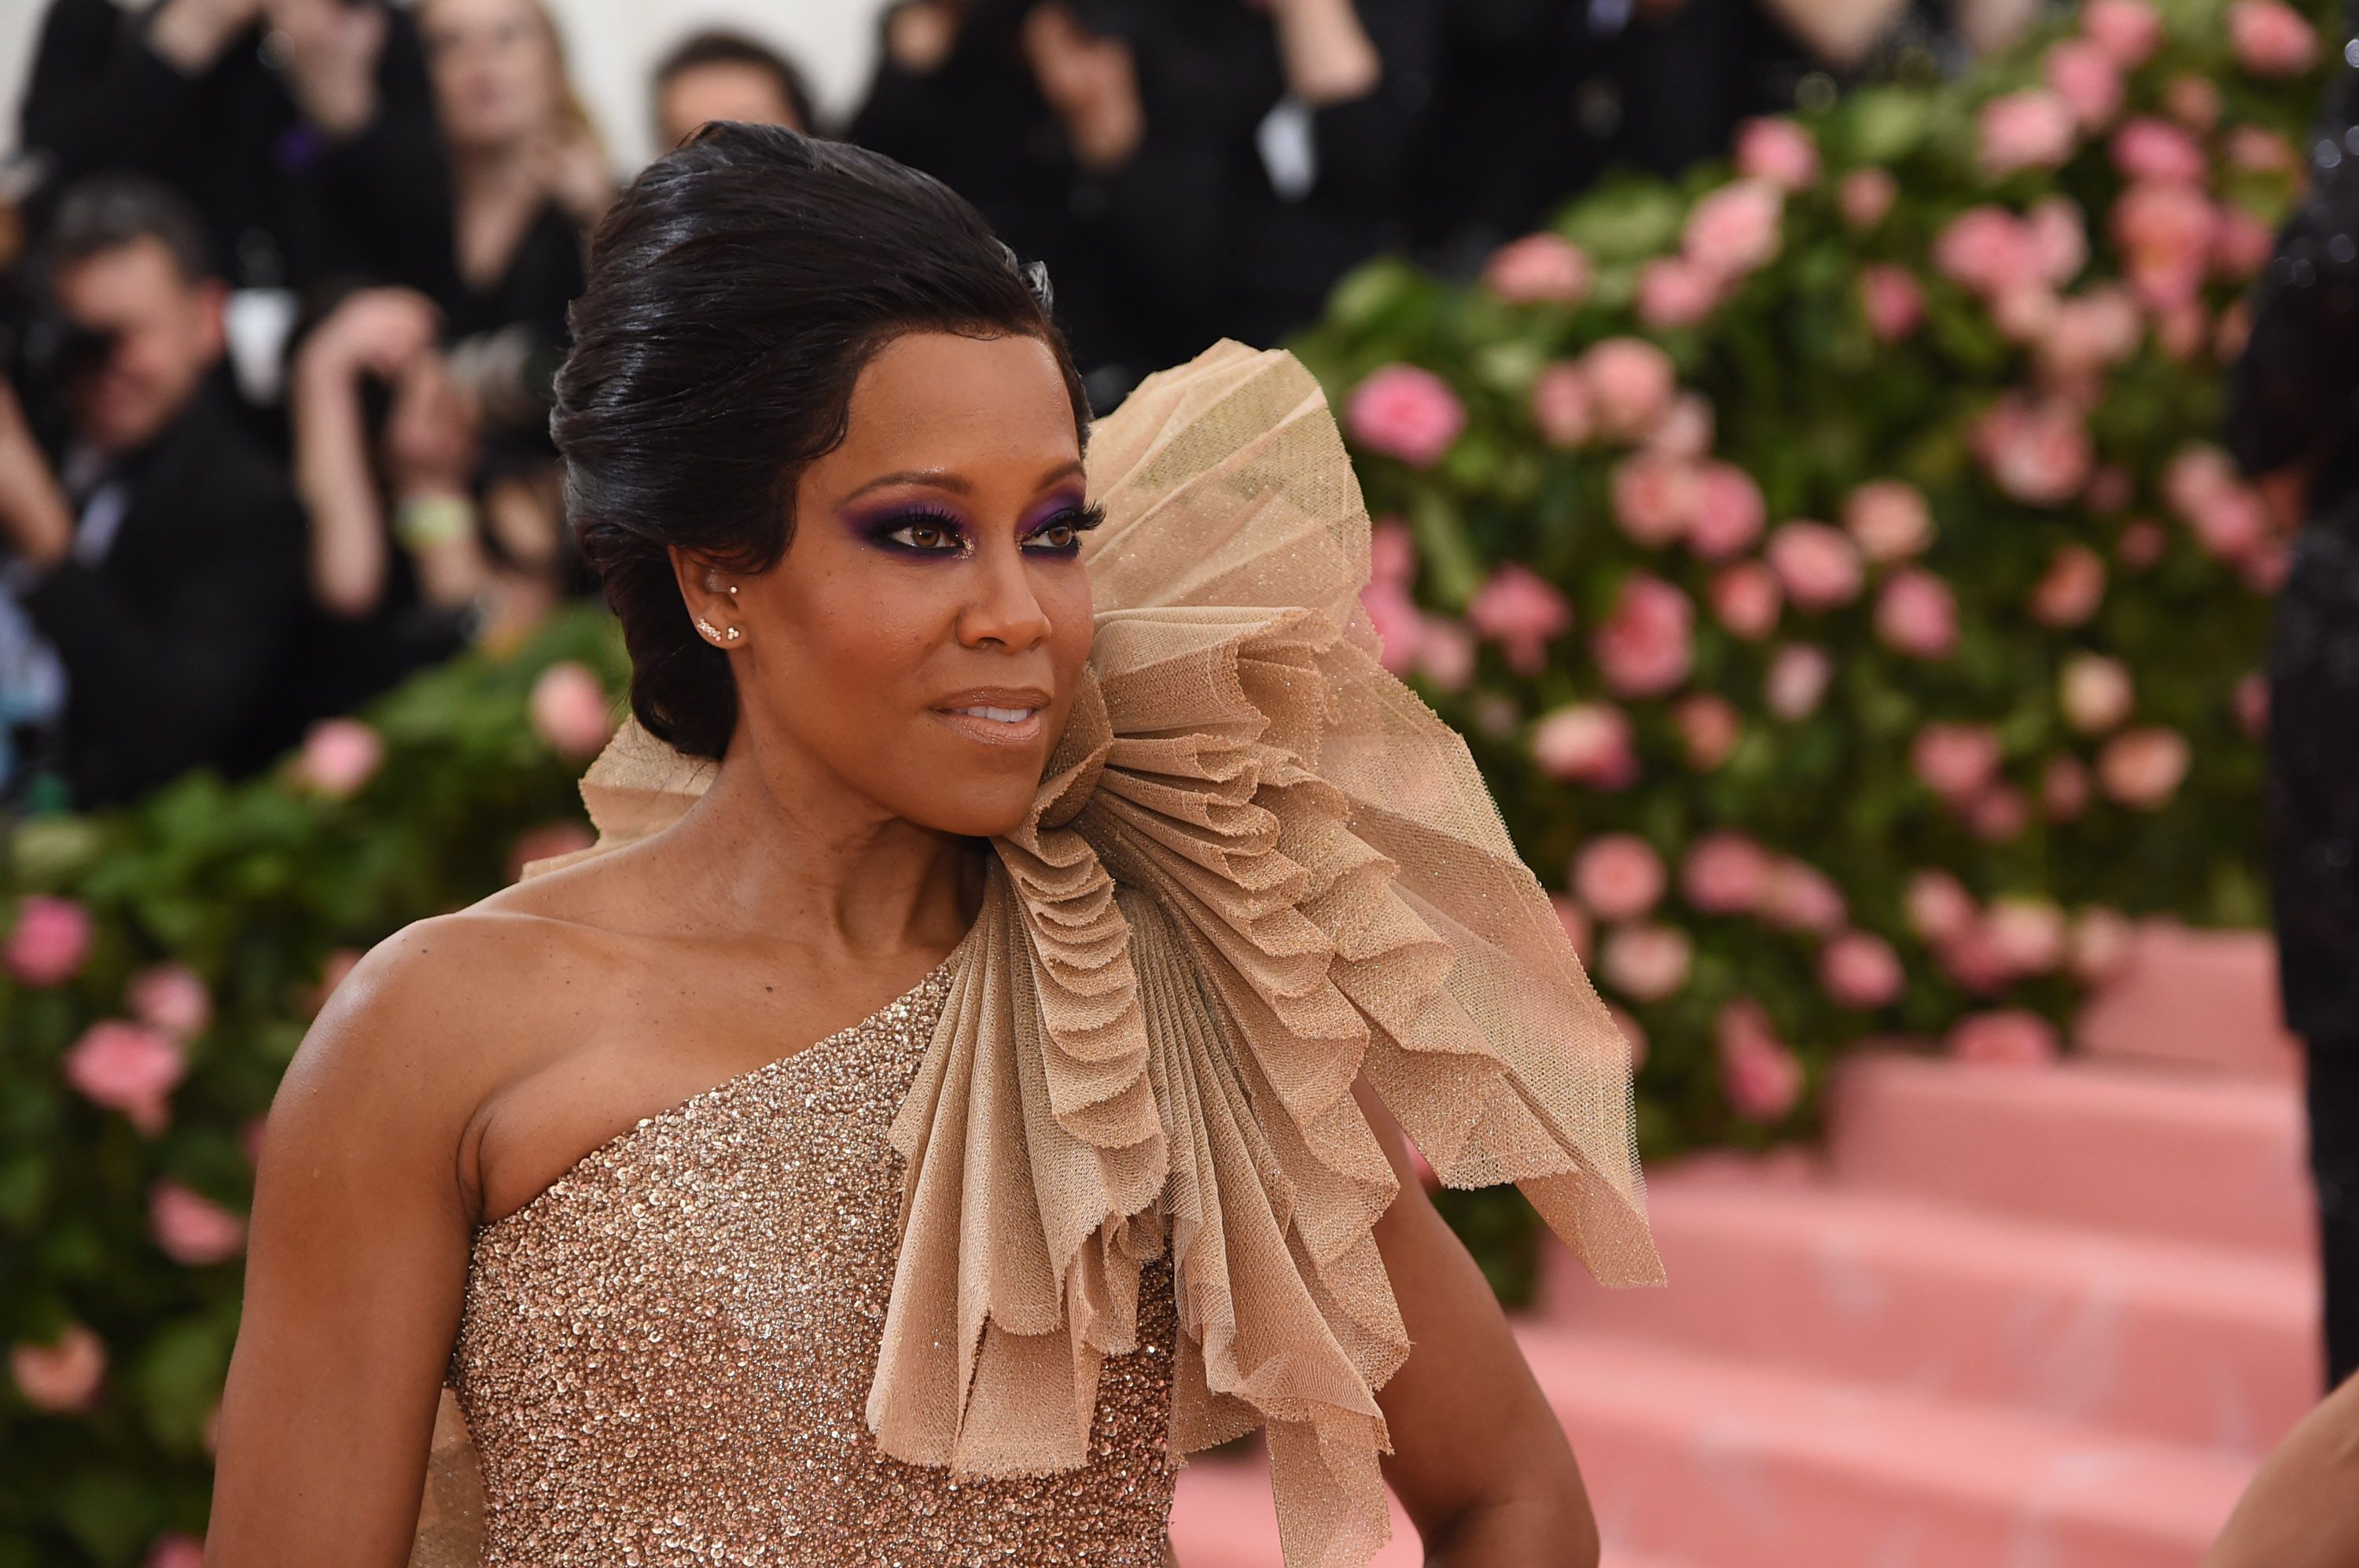 Regina King at the 2019 Met Gala "Celebrating Camp: Notes on Fashion" at Metropolitan Museum of Art on May 06, 2019 | Photo: Getty Images